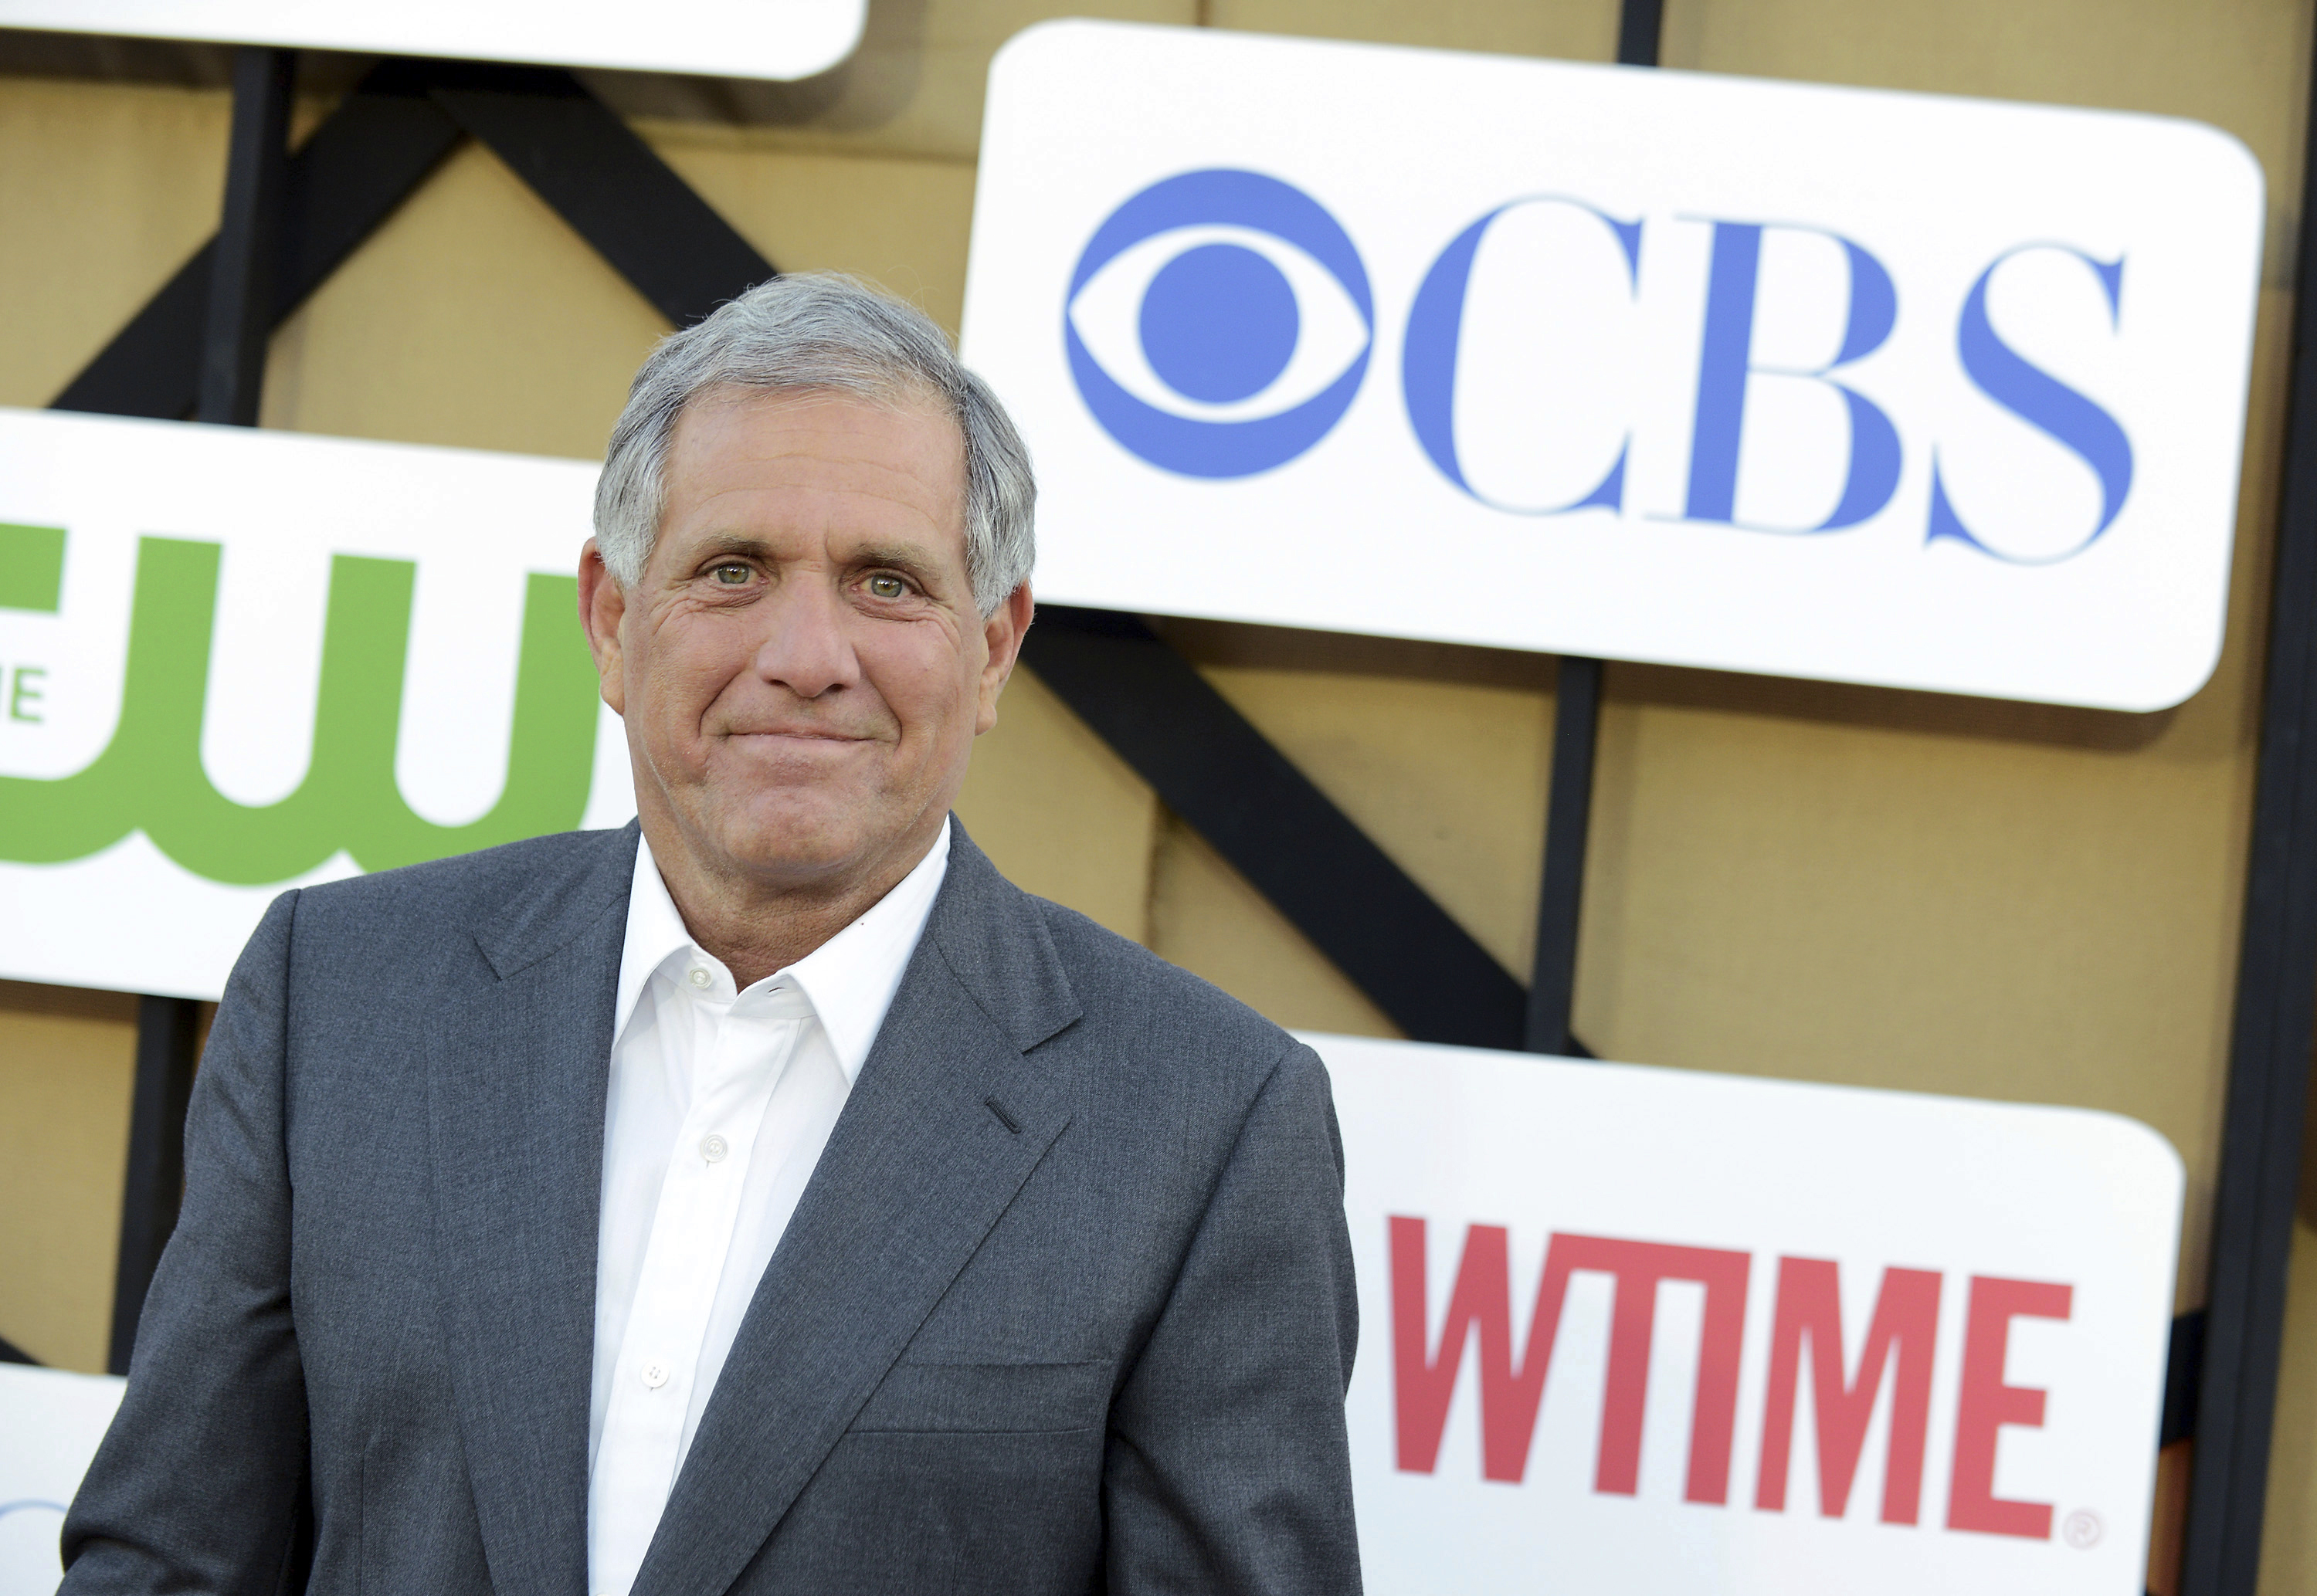 Scandal-plagued CBS grants $20M to 18 women’s rights groups